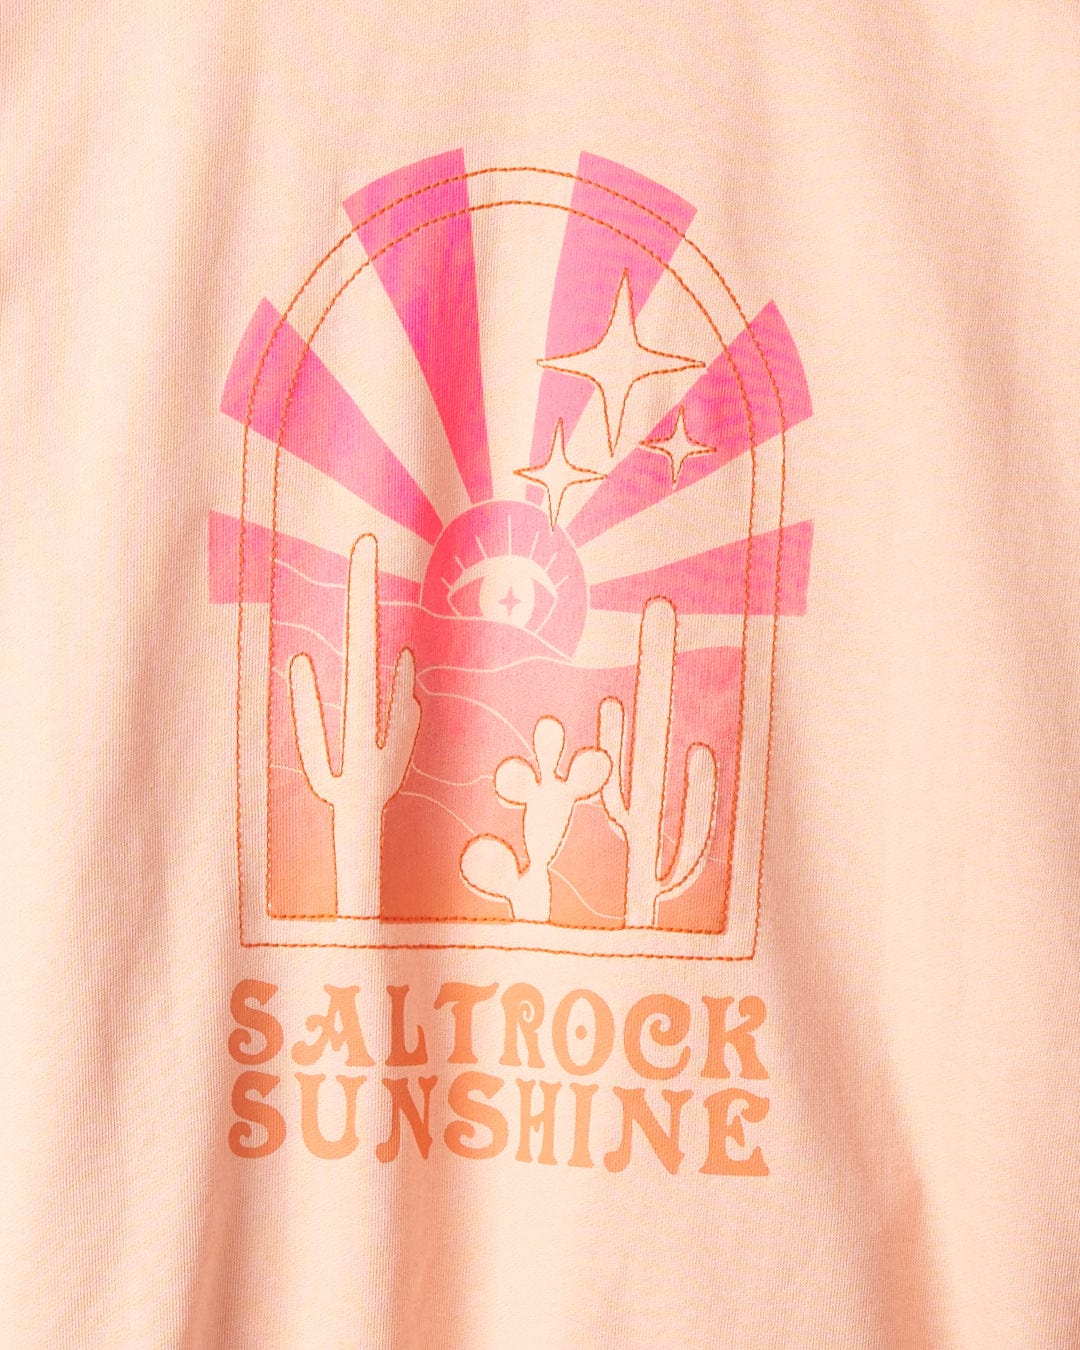 A graphic on a pale pink fabric featuring two cacti, a sun, stars, and rays with the text "Saltrock Sunshine" at the bottom. This design is complemented by an embroidered Saltrock logo on 100% cotton for added charm. The product is called Saltrock Sunshine - Womens Pop Hood - Peach by Saltrock.